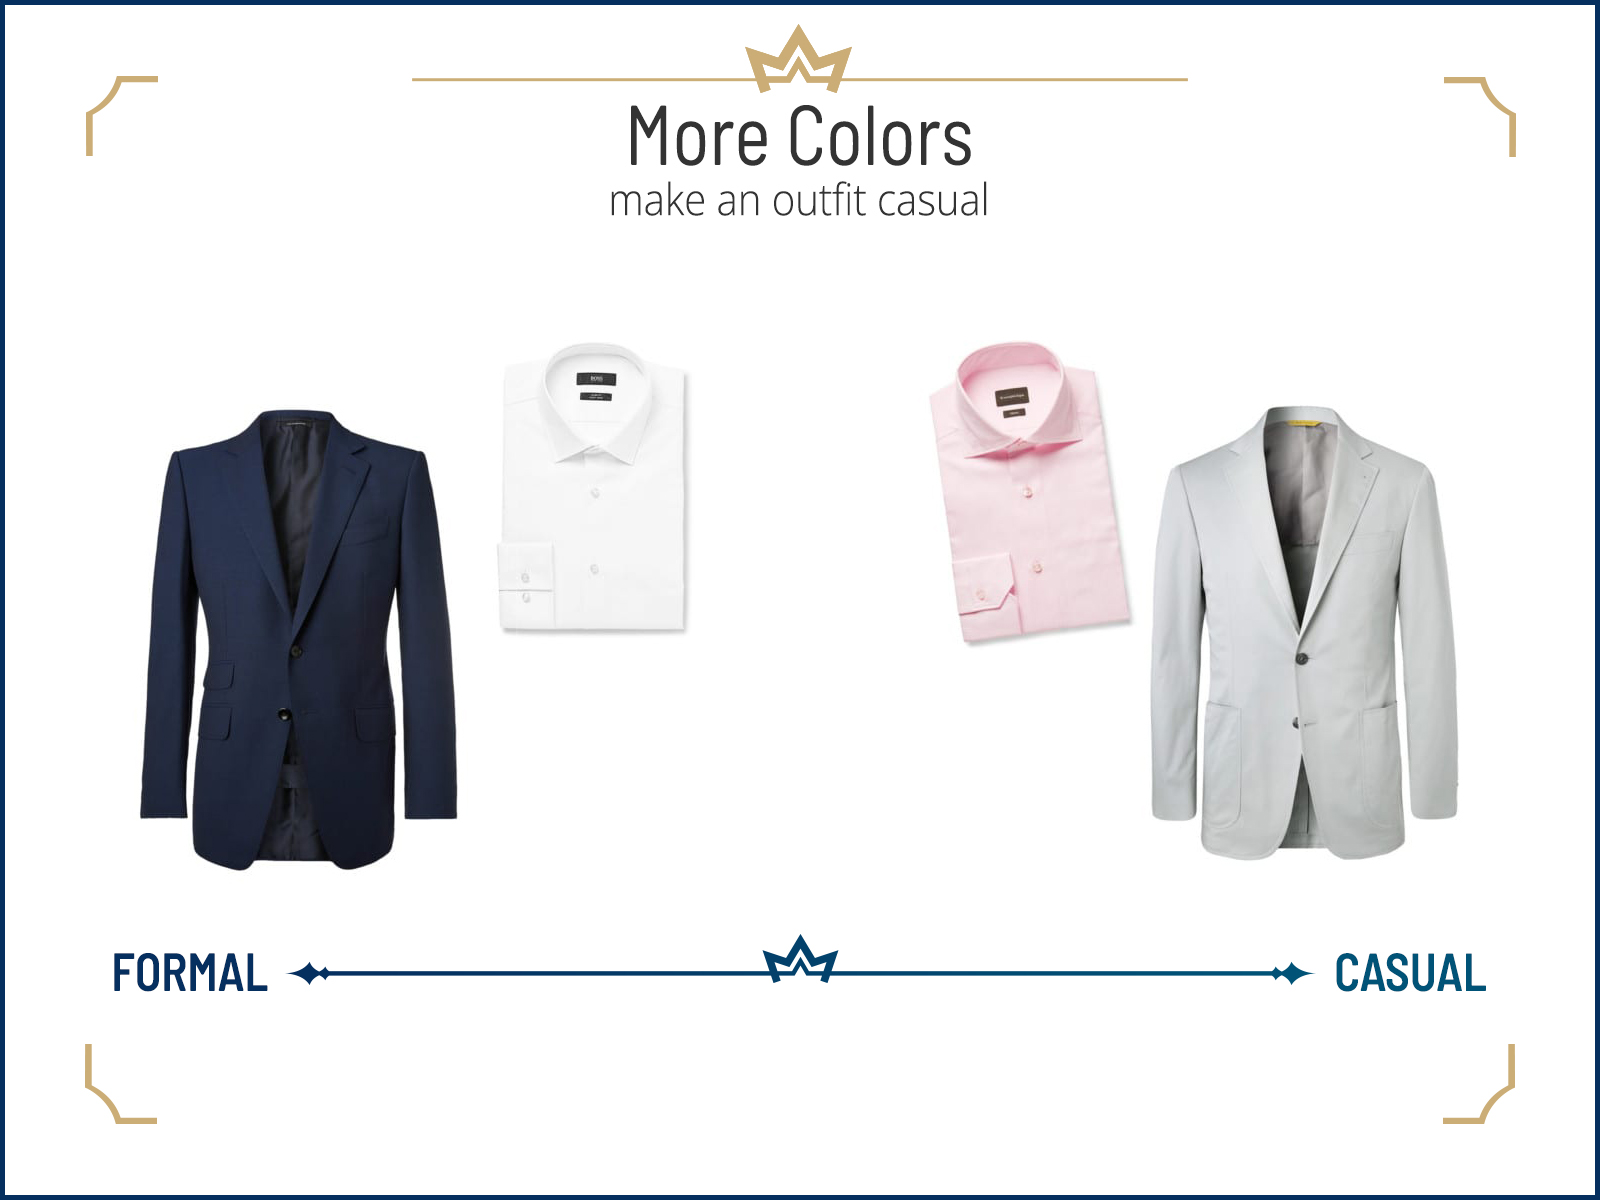 more colors lean toward more casual style